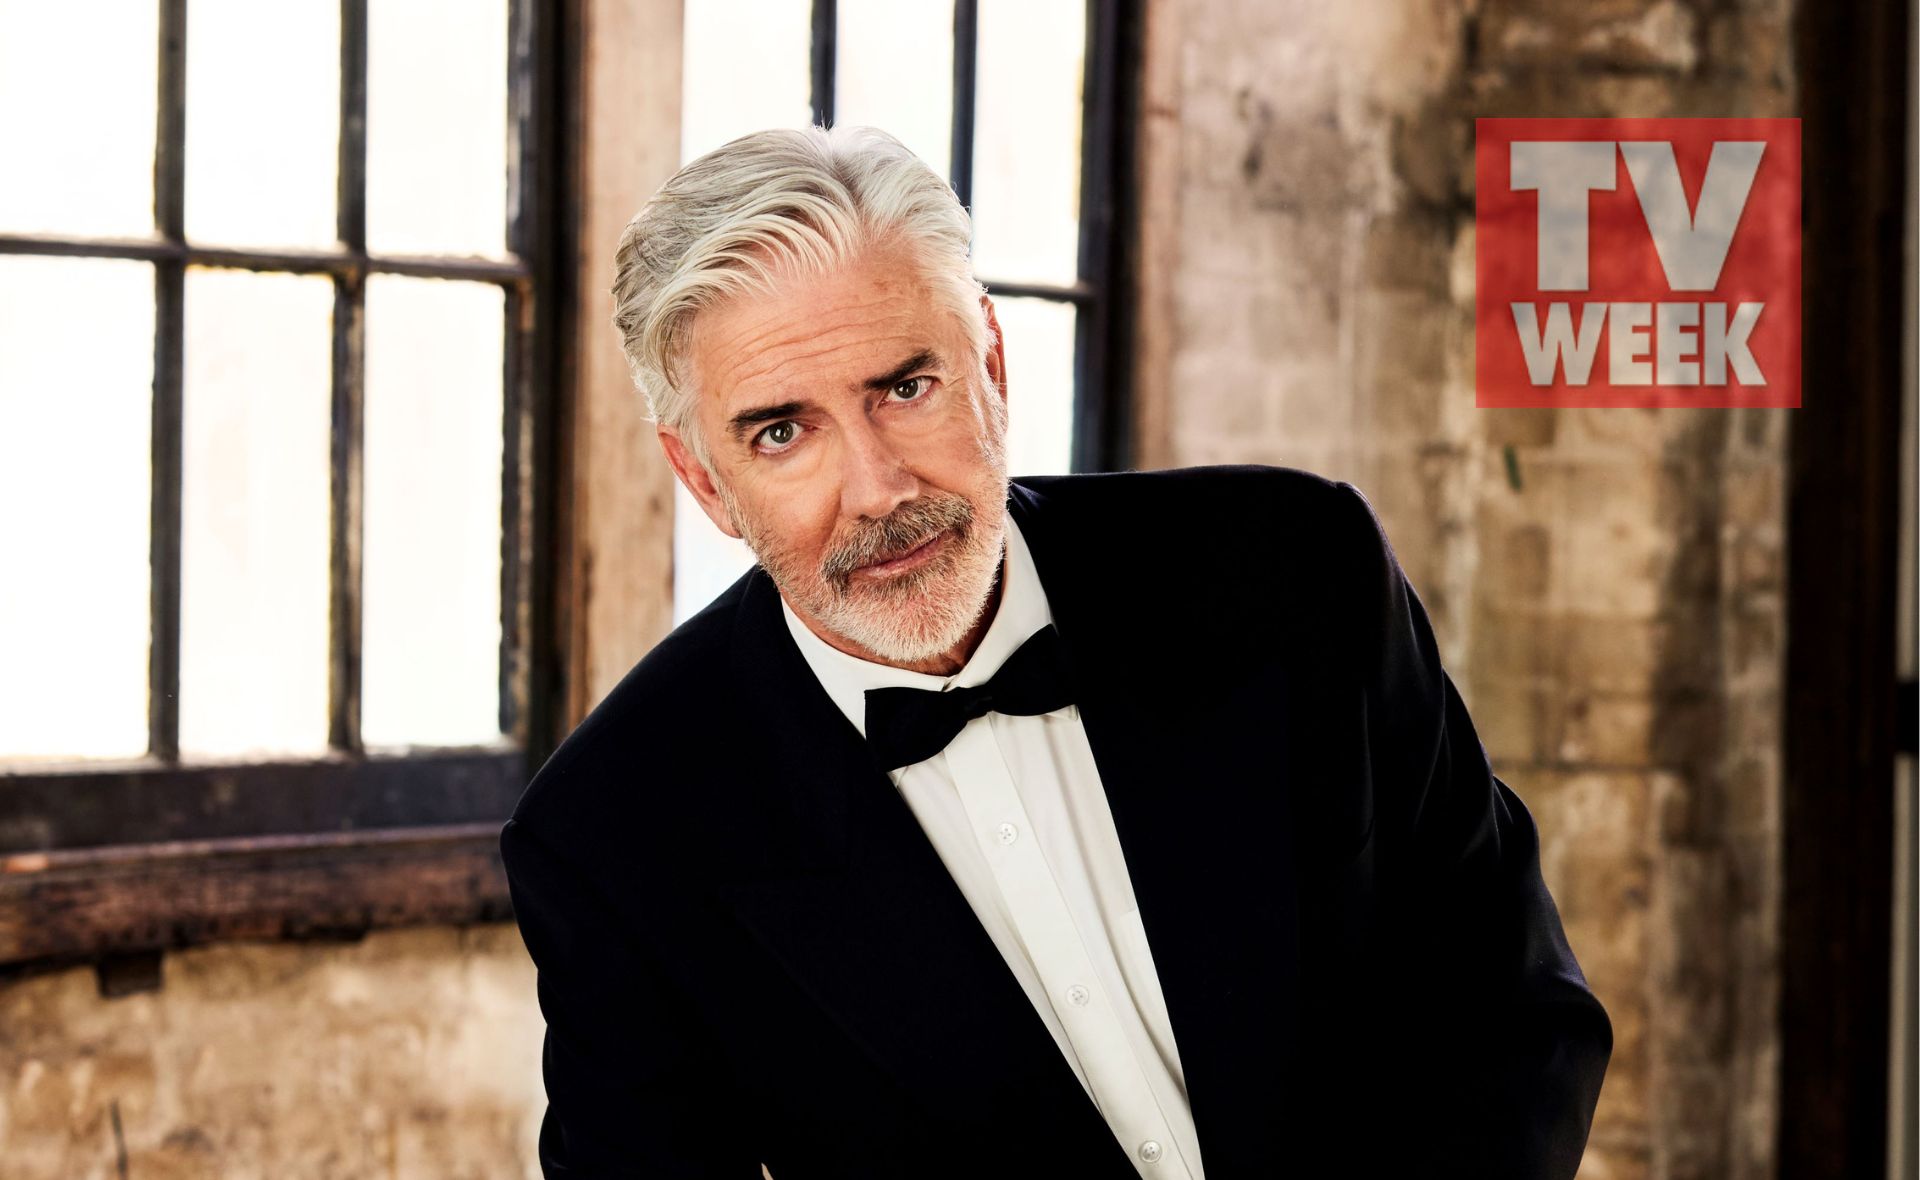 Shaun Micallef reflects on his years on screen: “I wanted to be like Bert!”